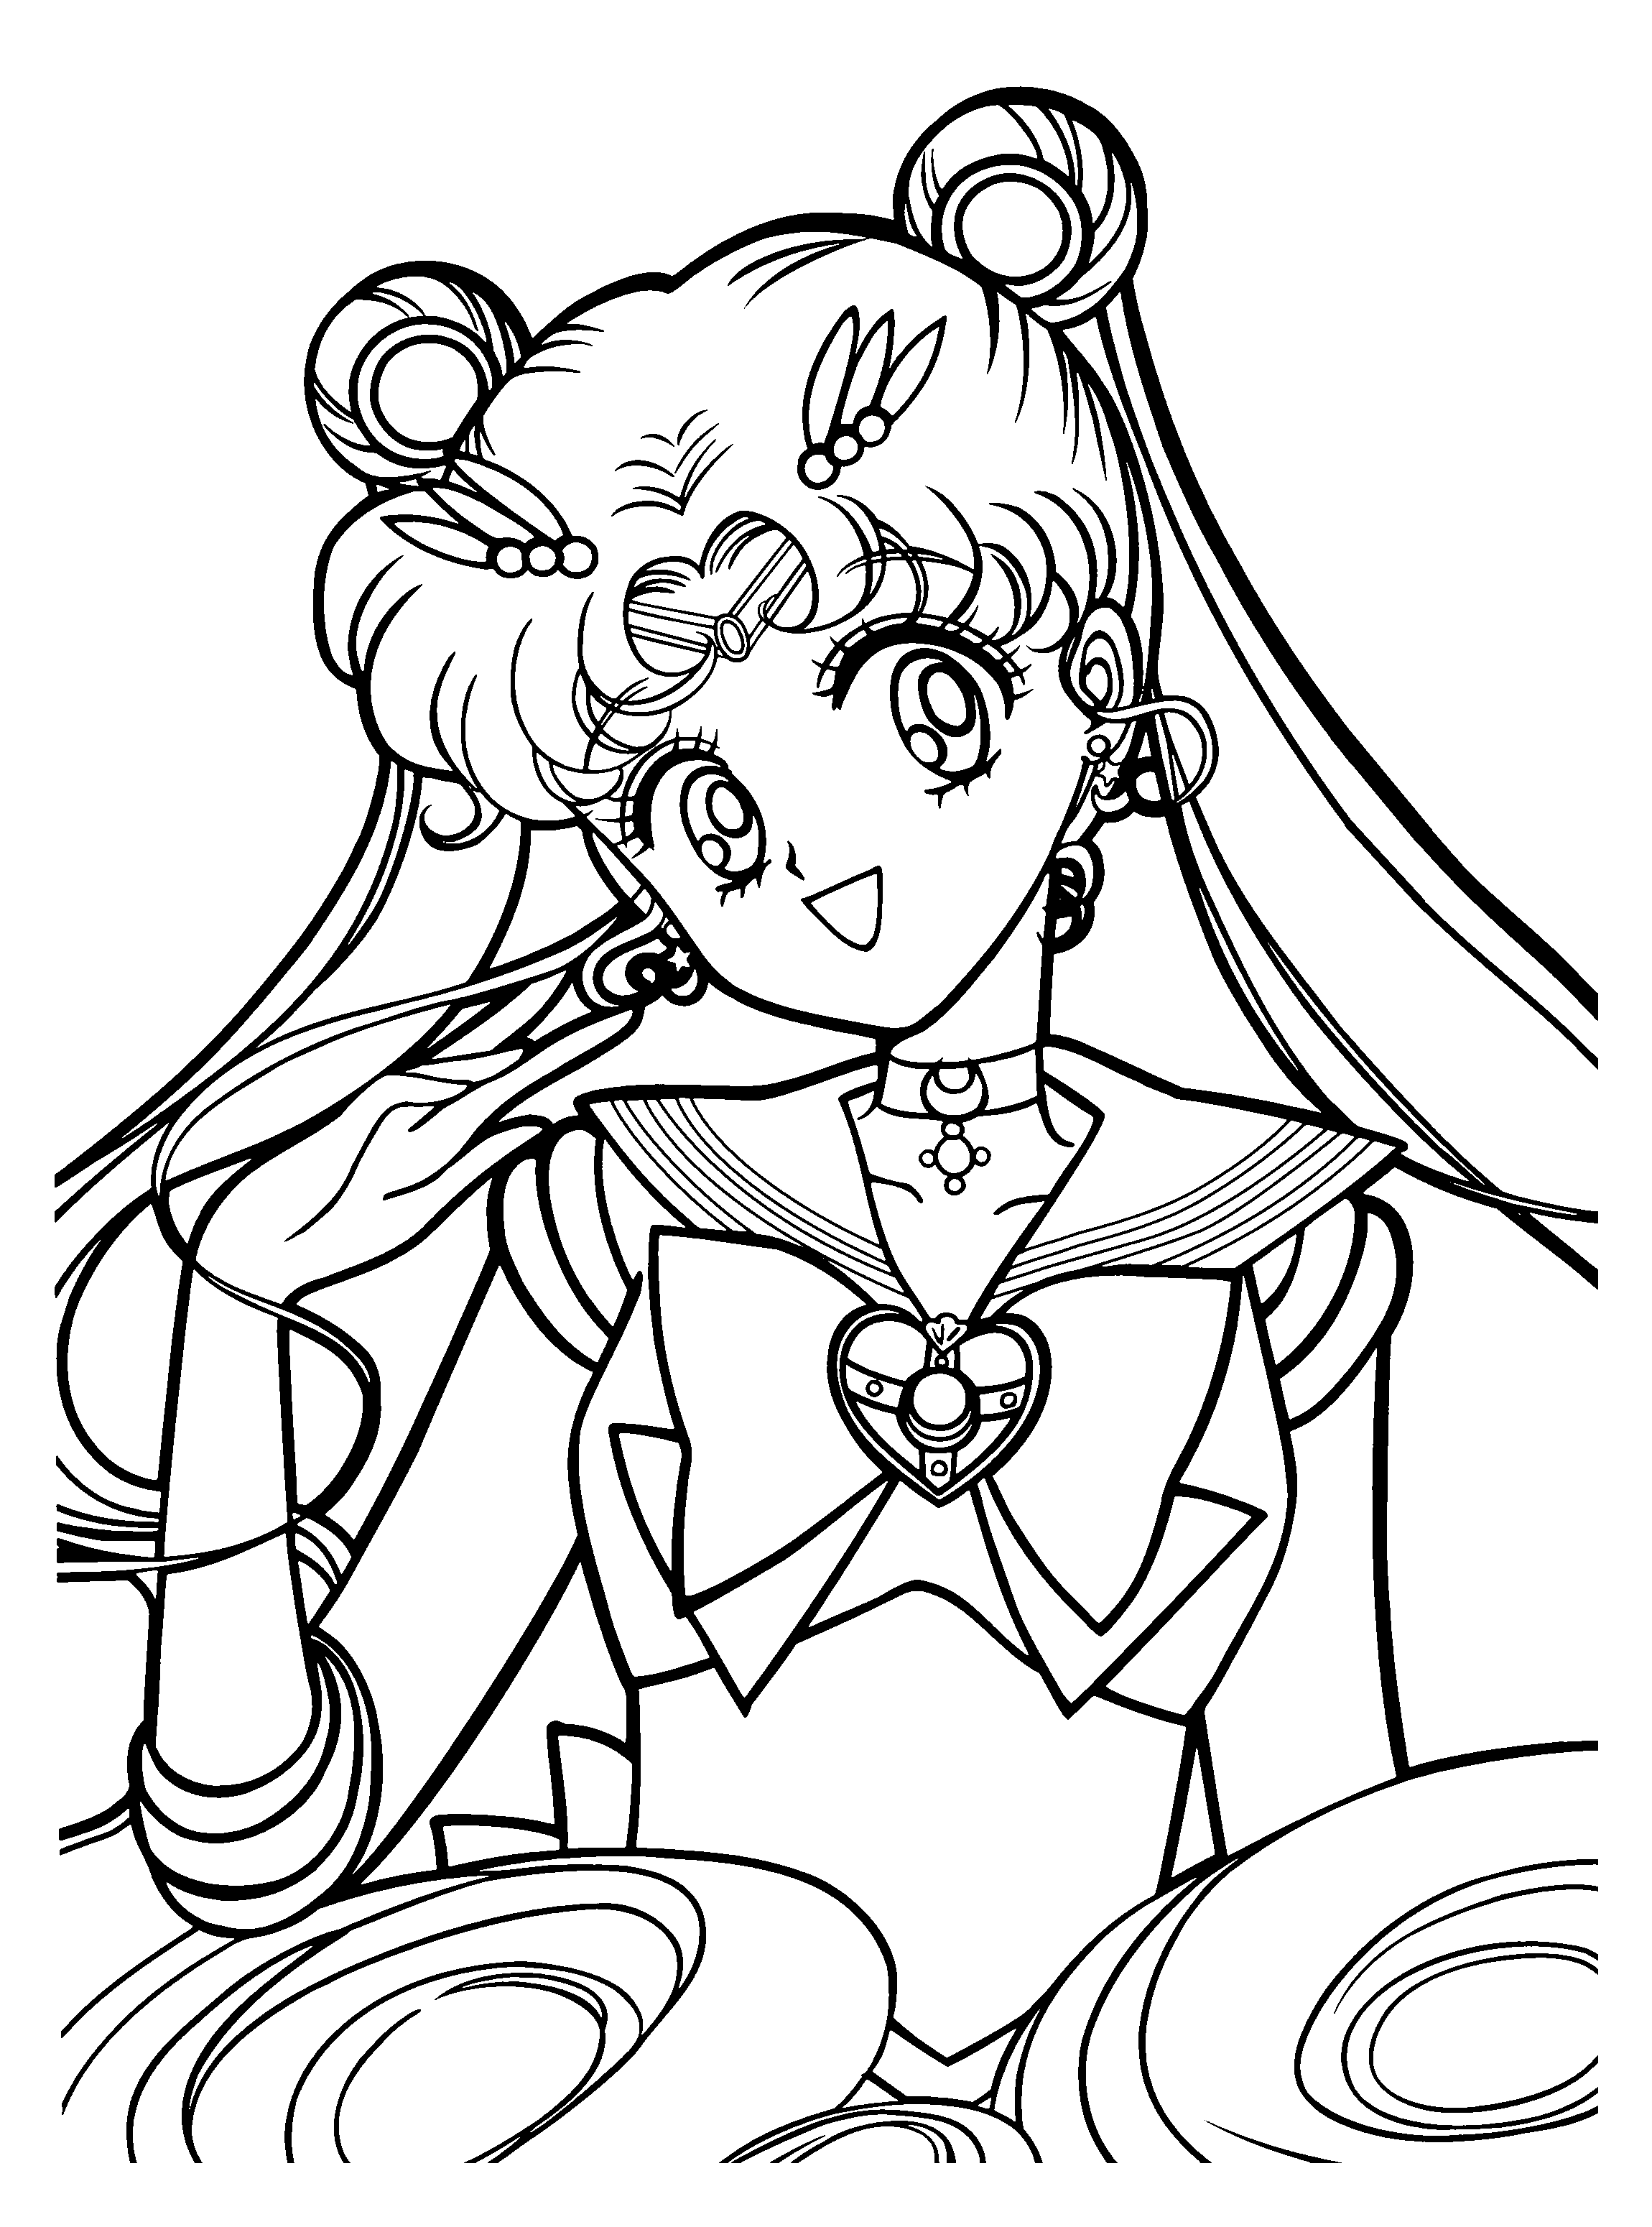 sailor moon coloring pages coloring pages sailor moon animated images gifs pages moon coloring sailor 